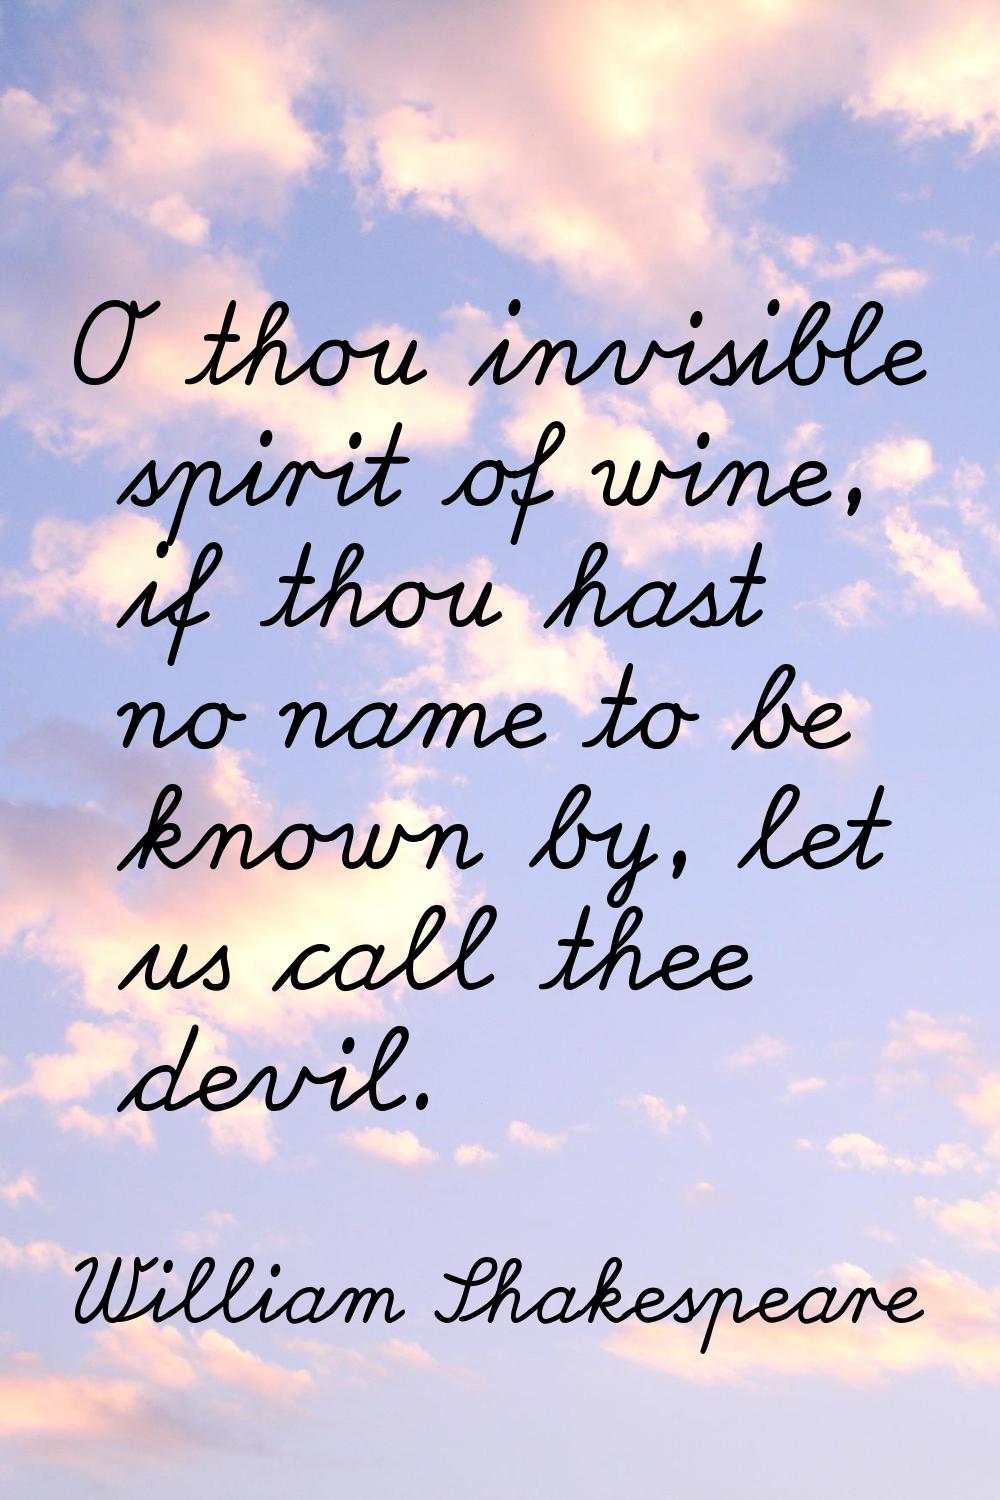 O thou invisible spirit of wine, if thou hast no name to be known by, let us call thee devil.